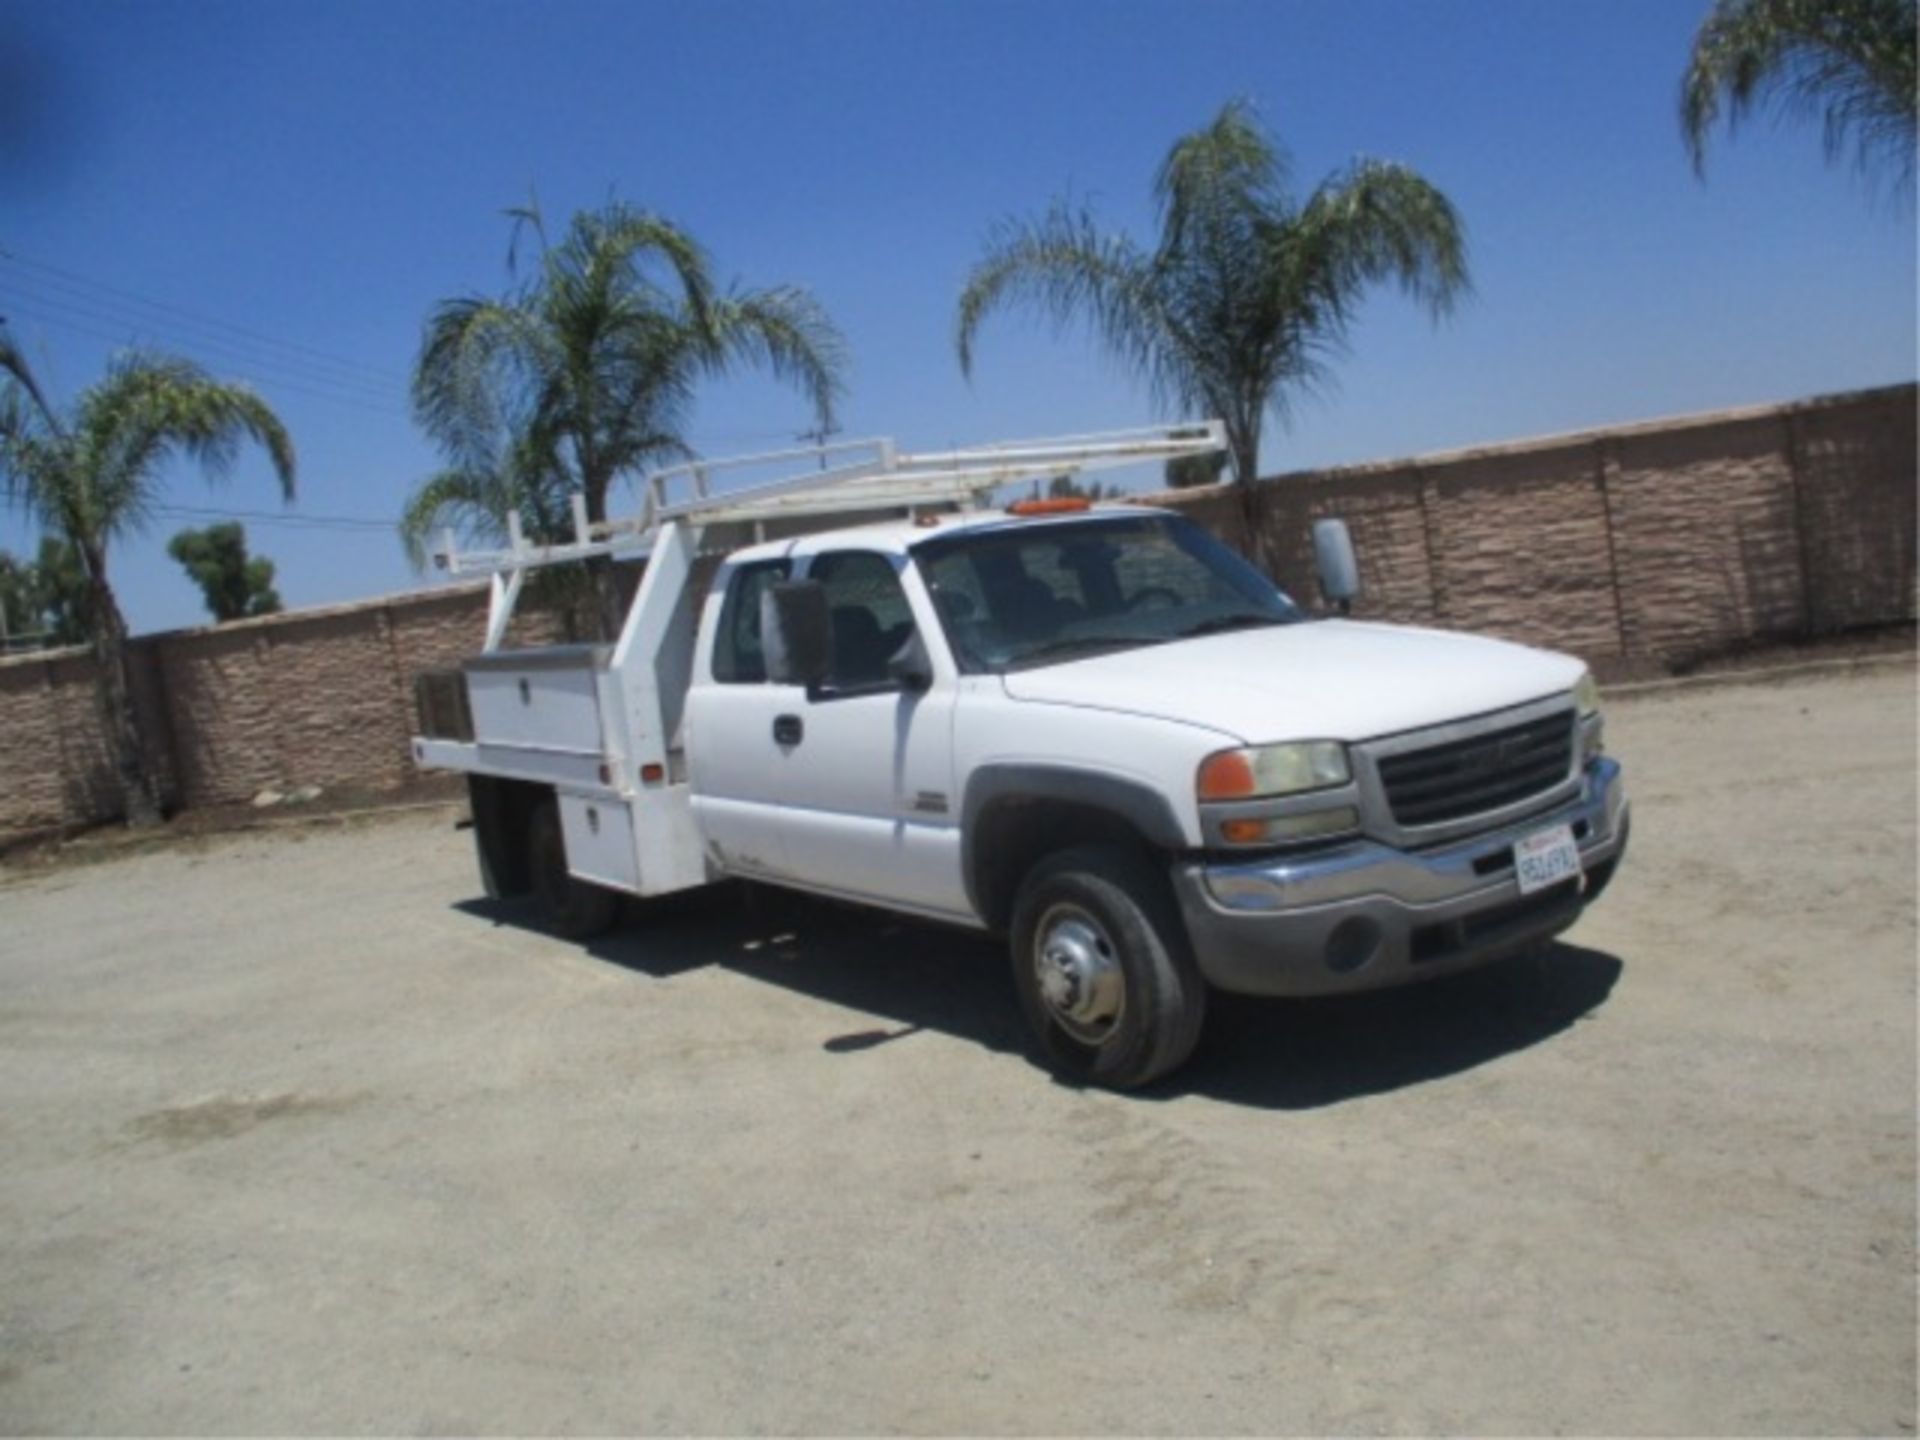 2006 Chevrolet 3500 Extended-Cab Utility Truck, 6.6L Turbo Diesel, Automatic, Tool Boxes, Lumber - Image 9 of 71